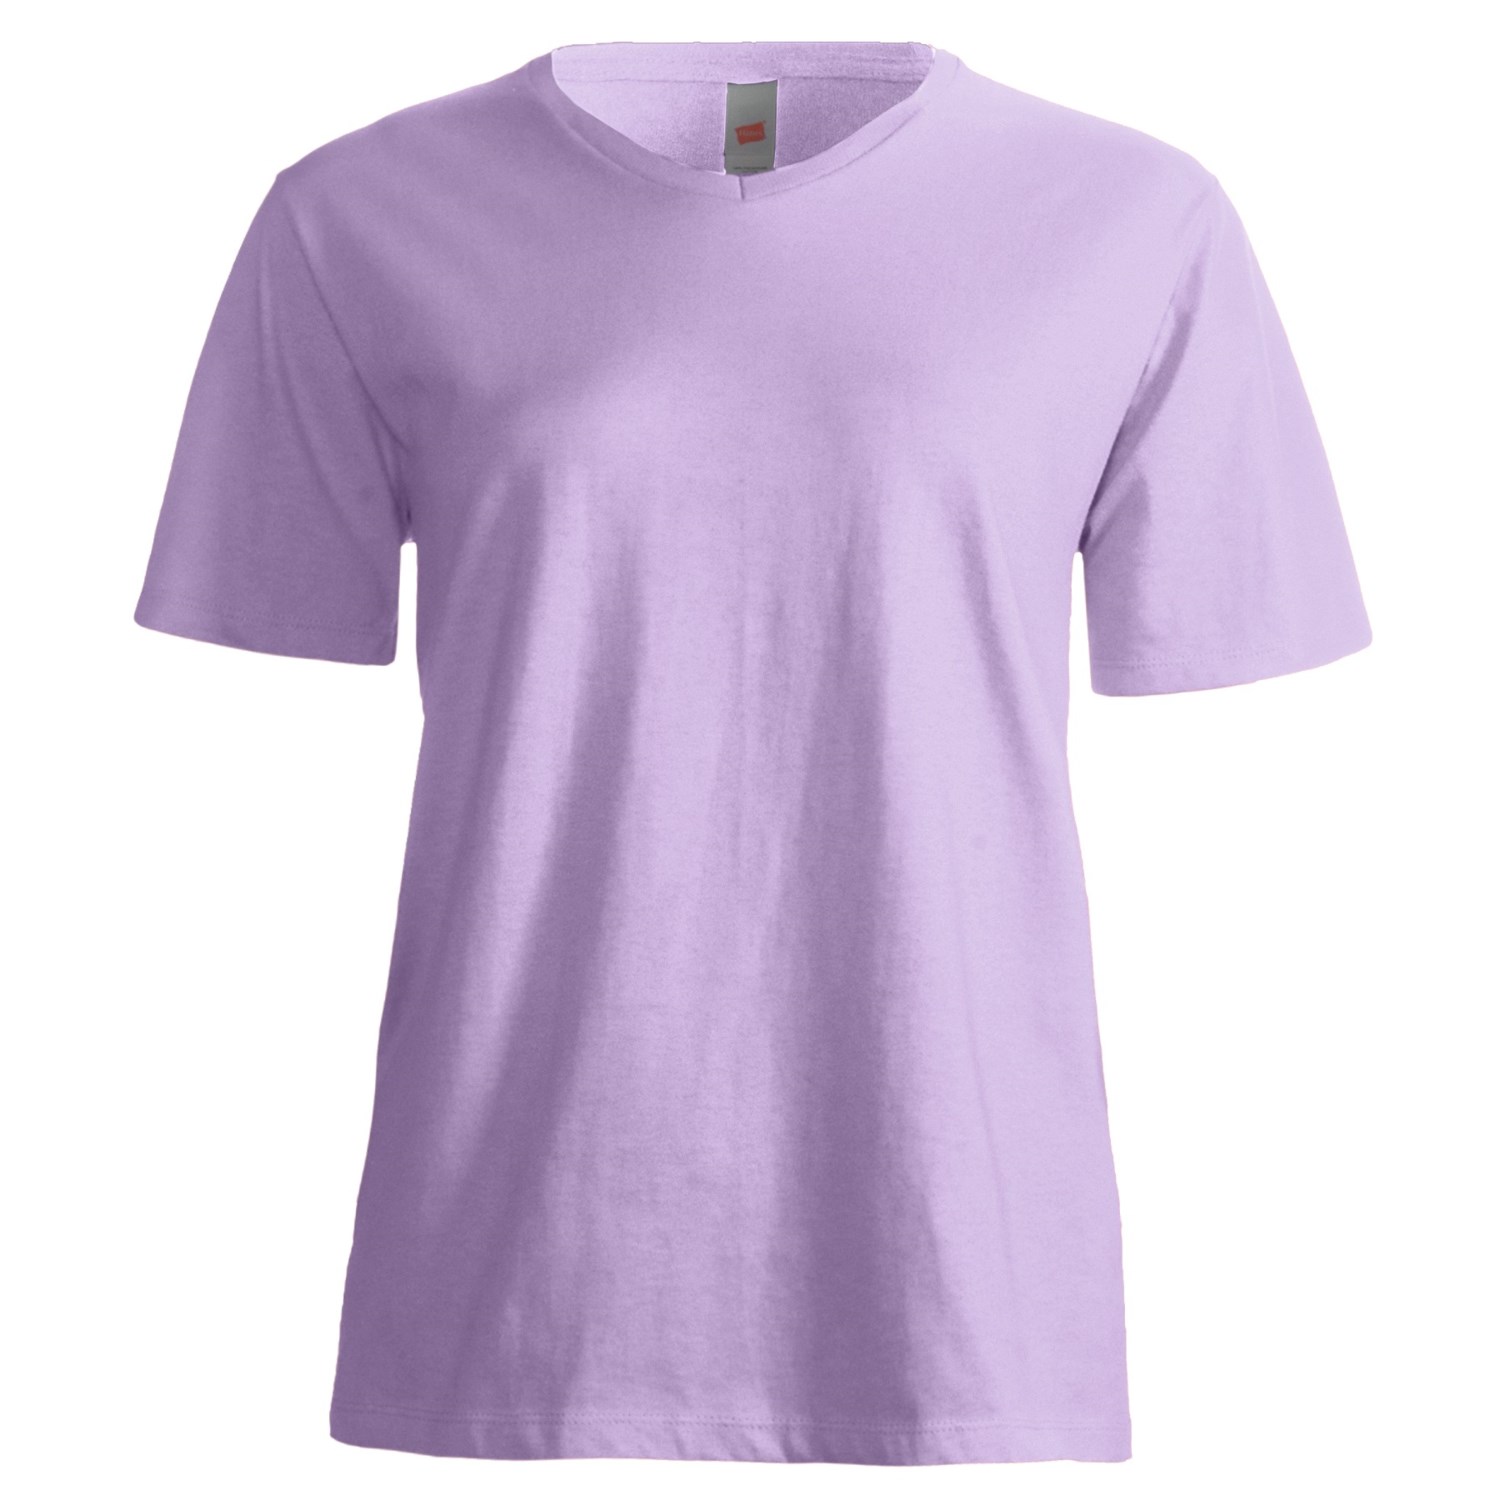 what color shirt goes with light purple shortstack